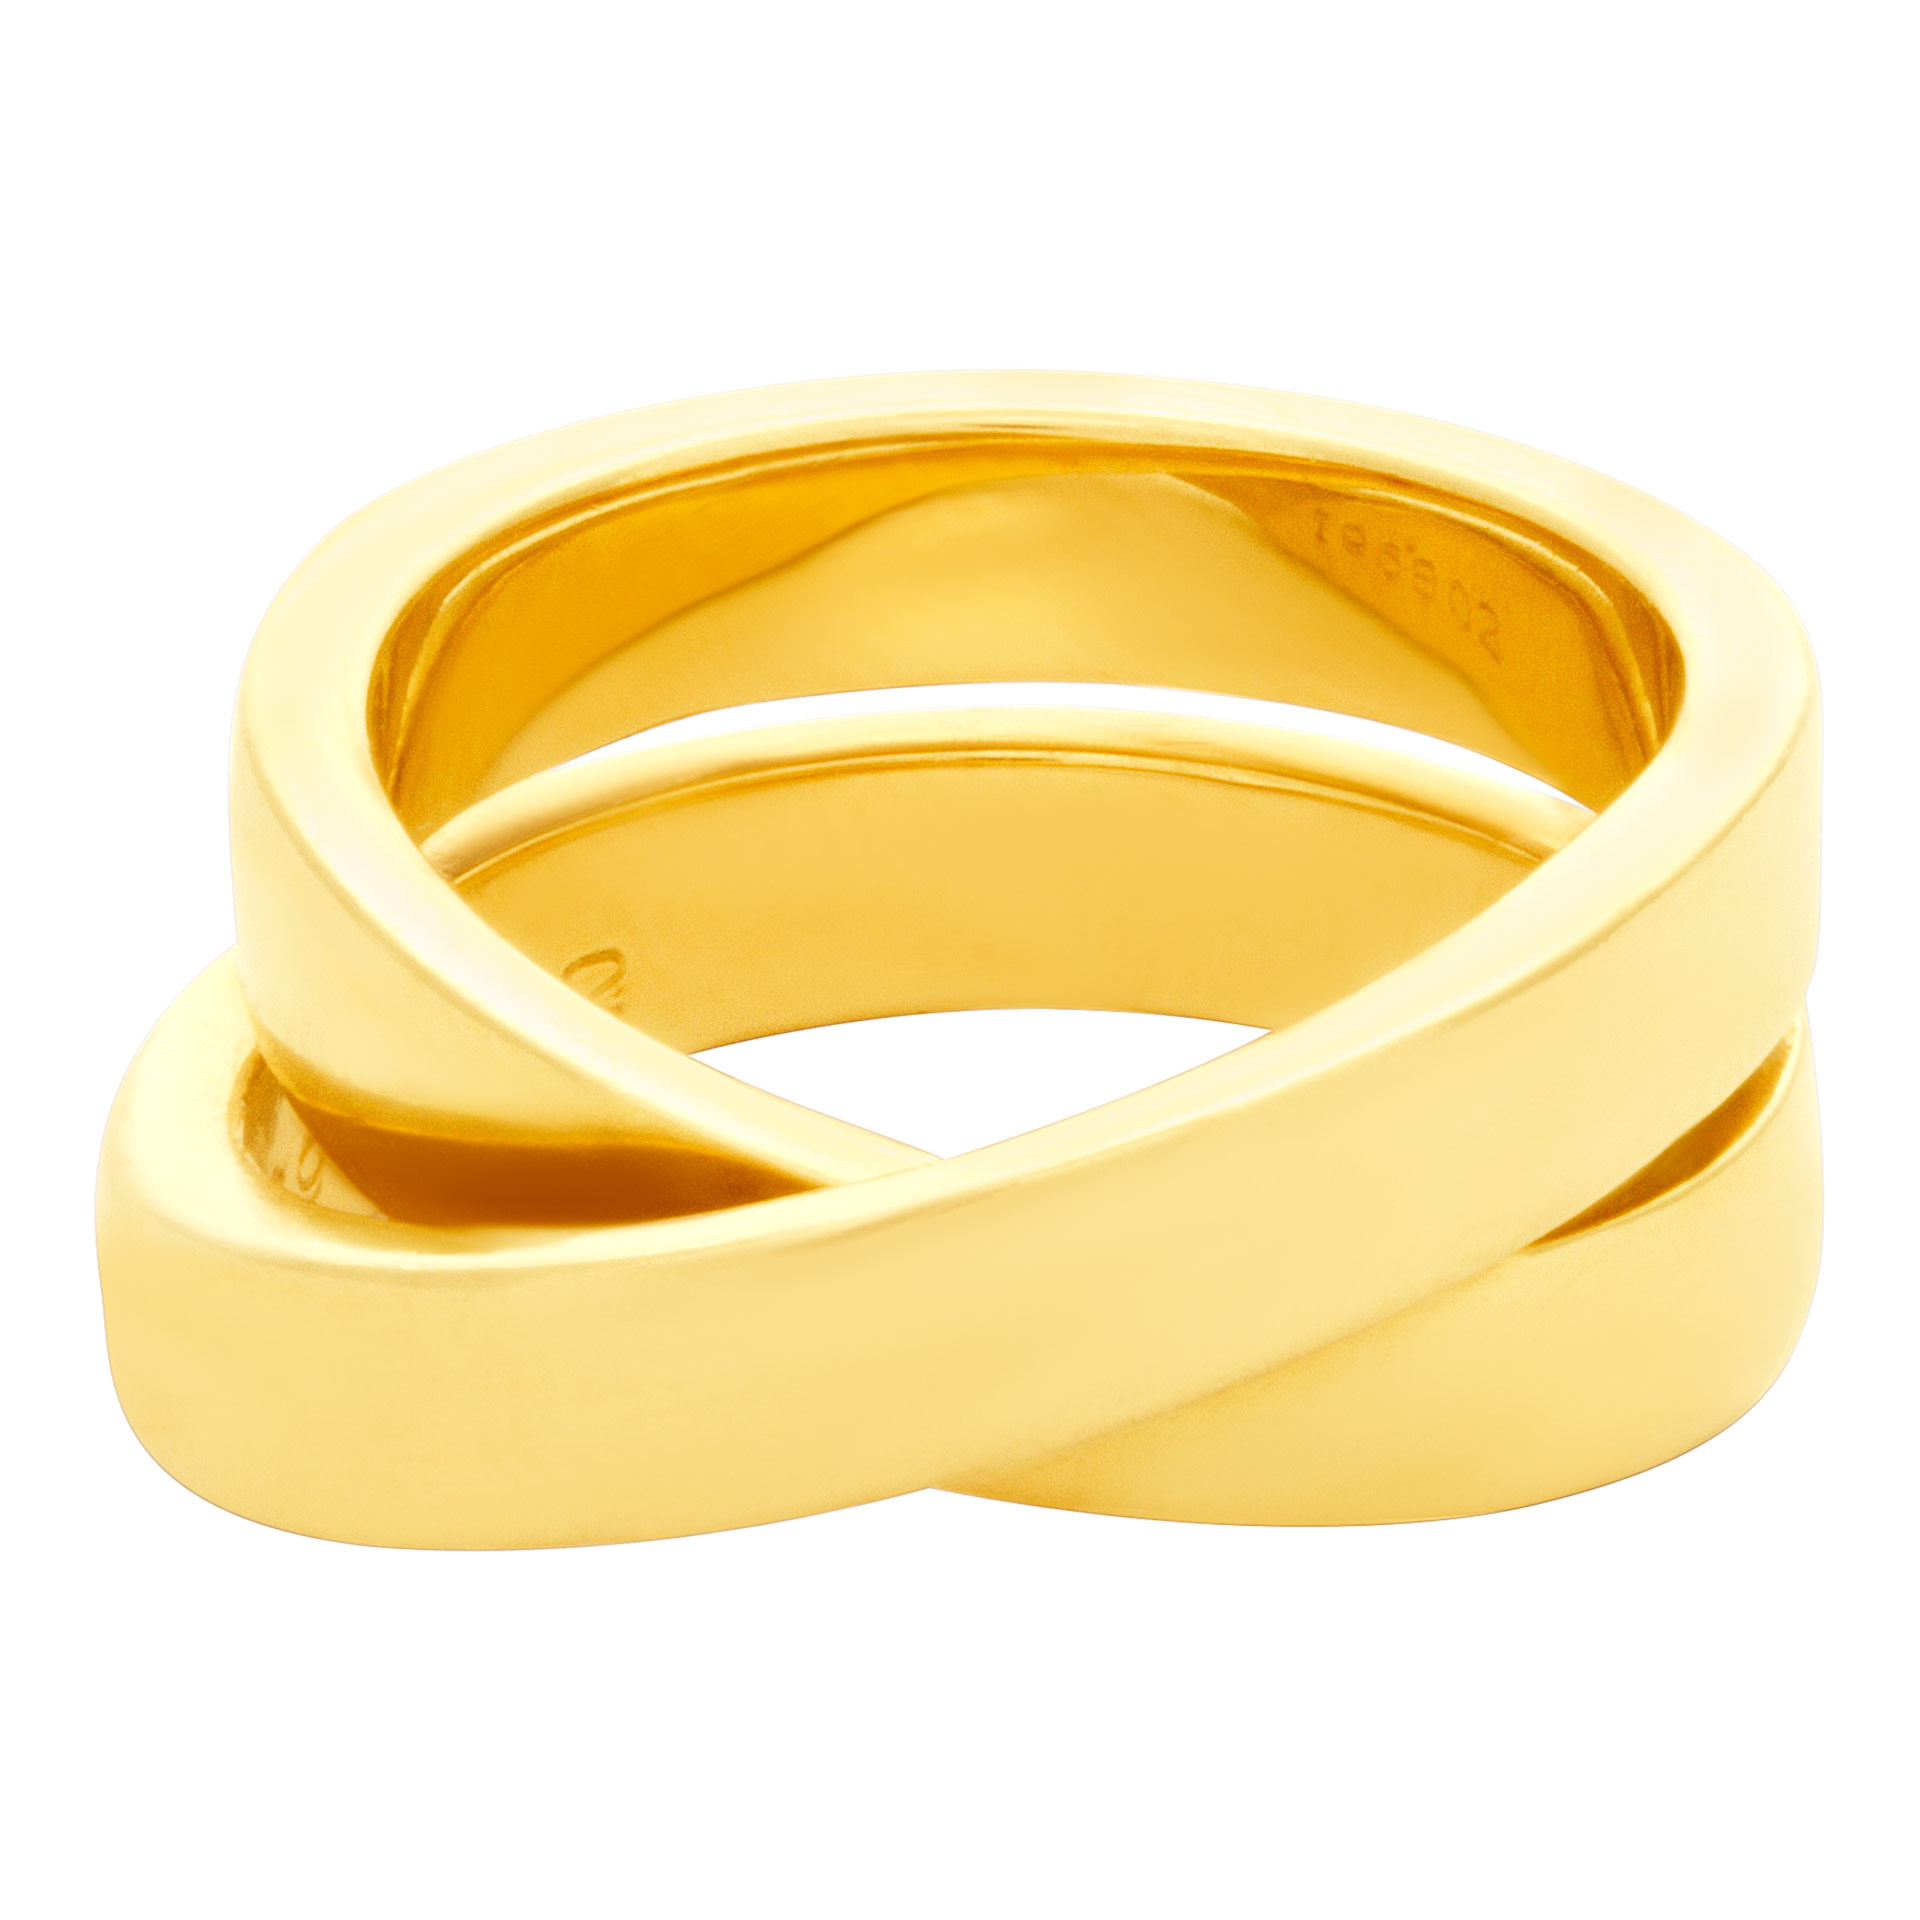 Cartier Crossover ring in 18k image 1